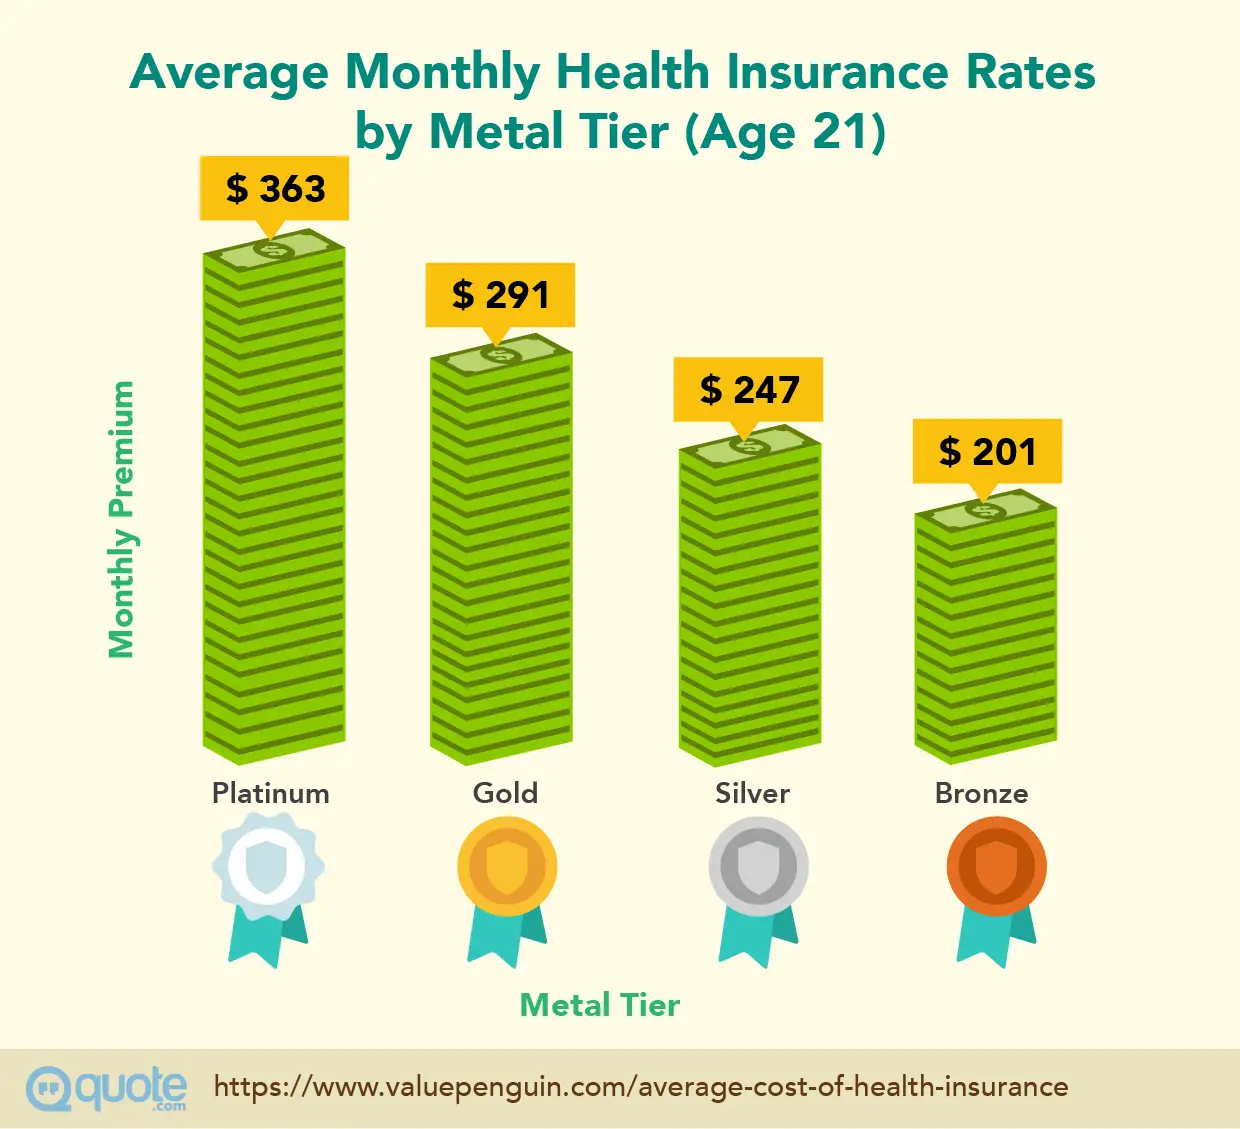 The Complete Guide to Health Insurance